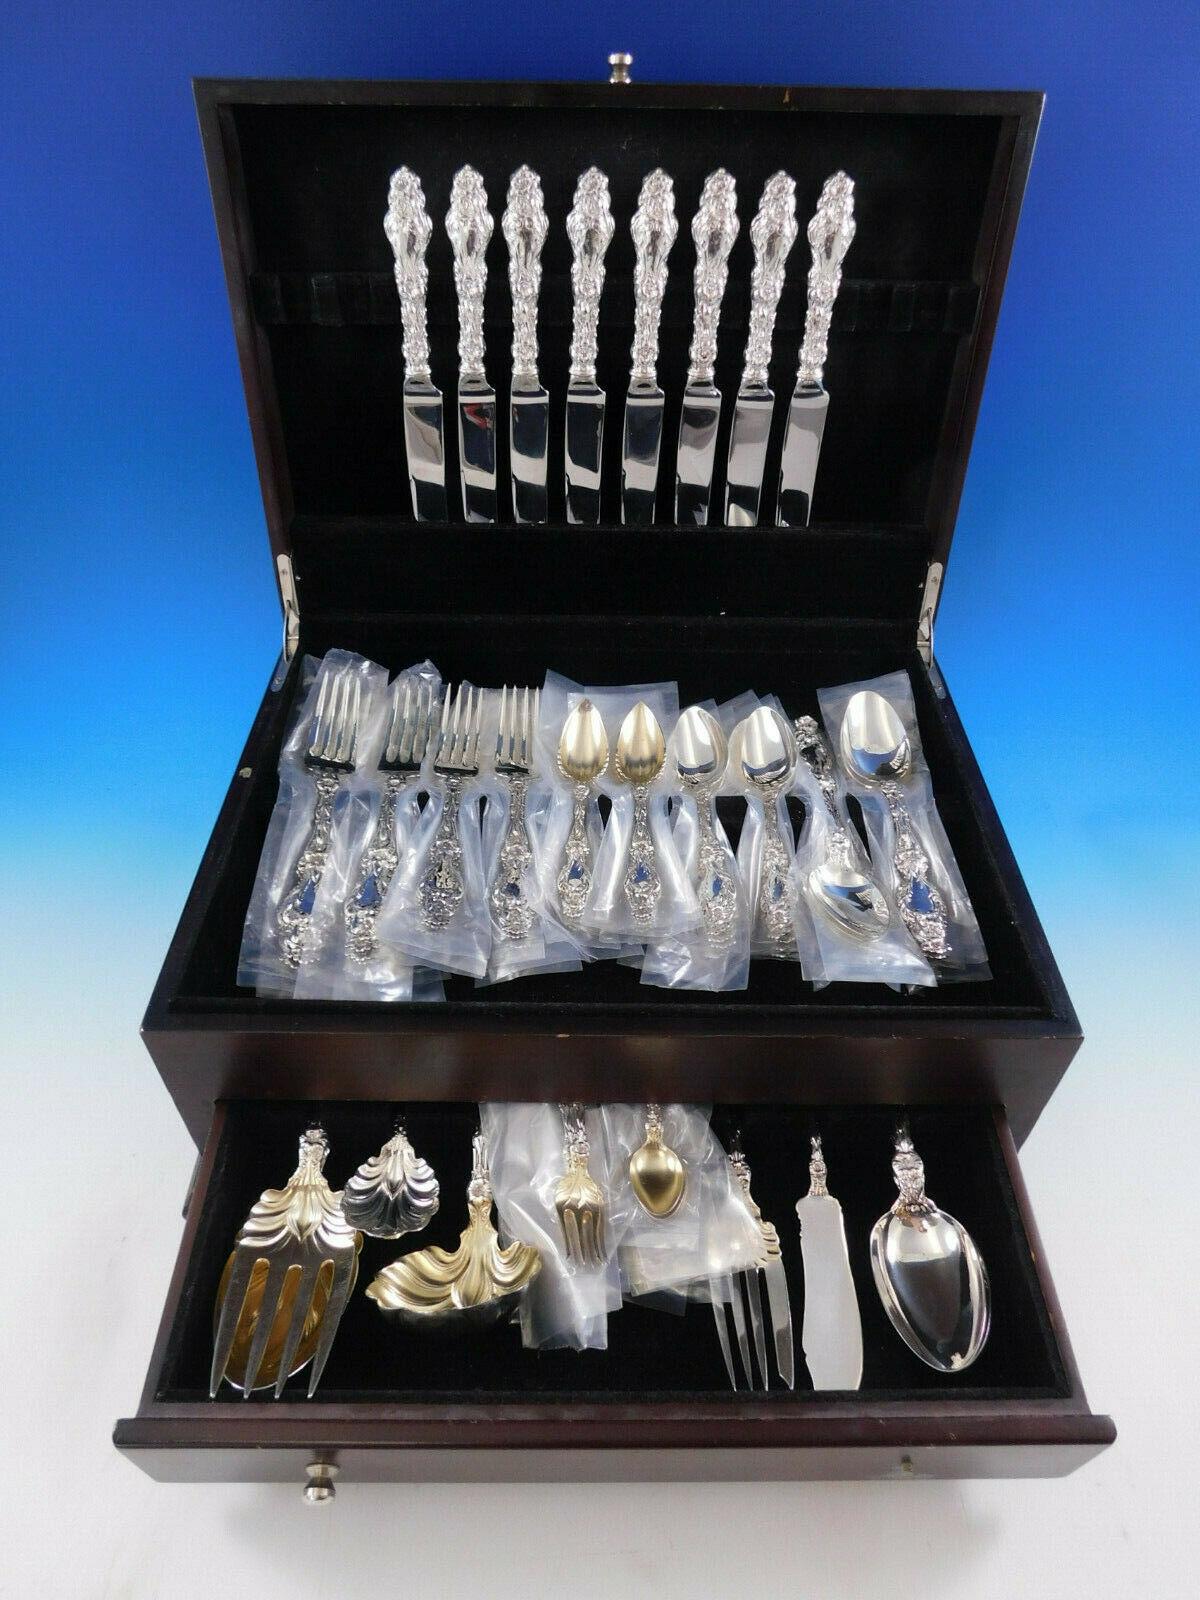 Superb dinner size Lily by Whiting sterling silver flatware set, 72 pieces. This set includes:

8 dinner knives, 9 1/2